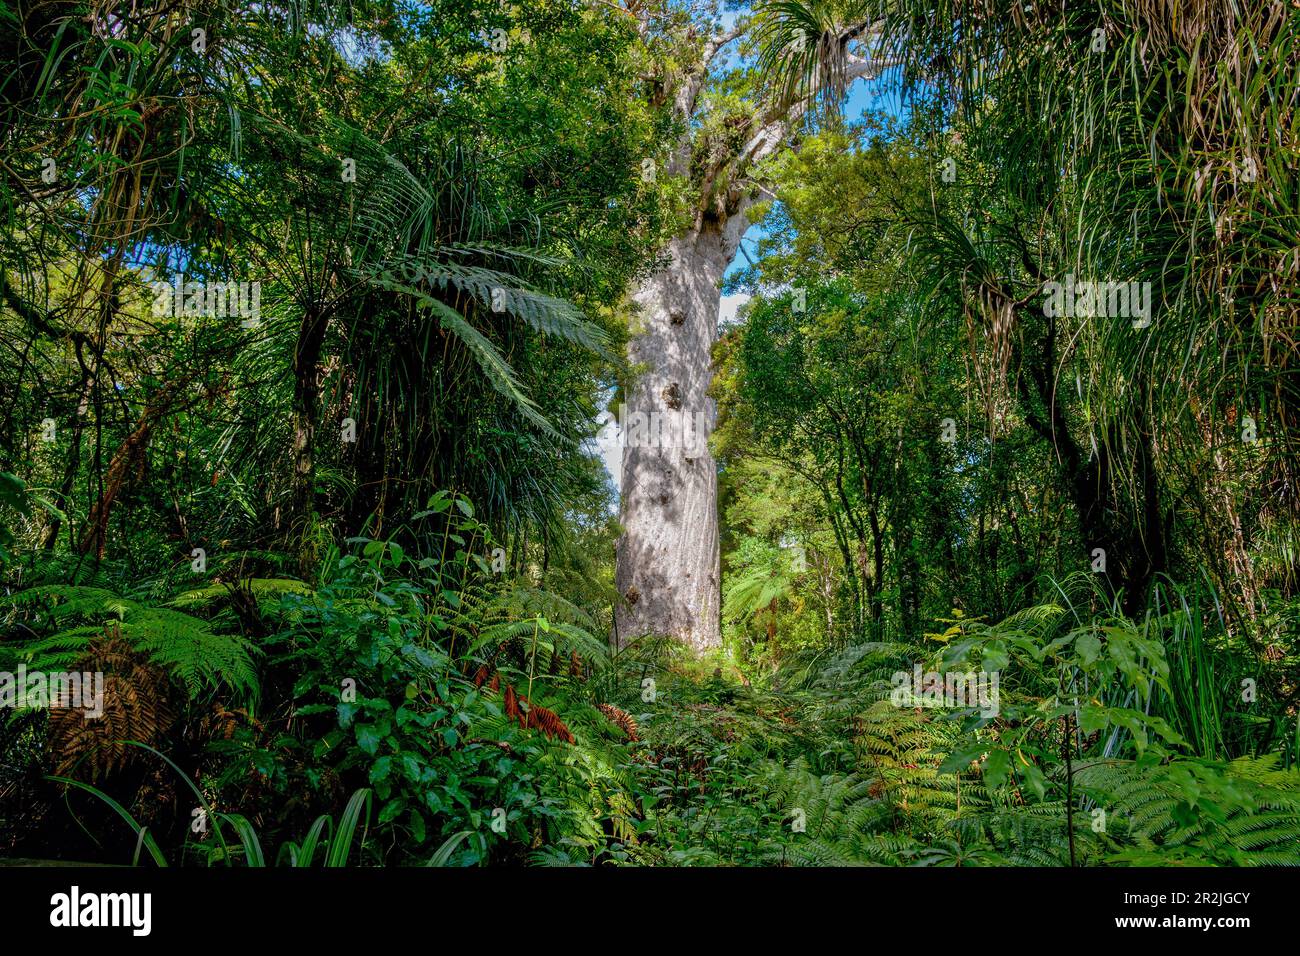 Giant kauri tree famous tourist point of interest surround by native bush and ferns in Waipoua Forest in Northland. Stock Photo